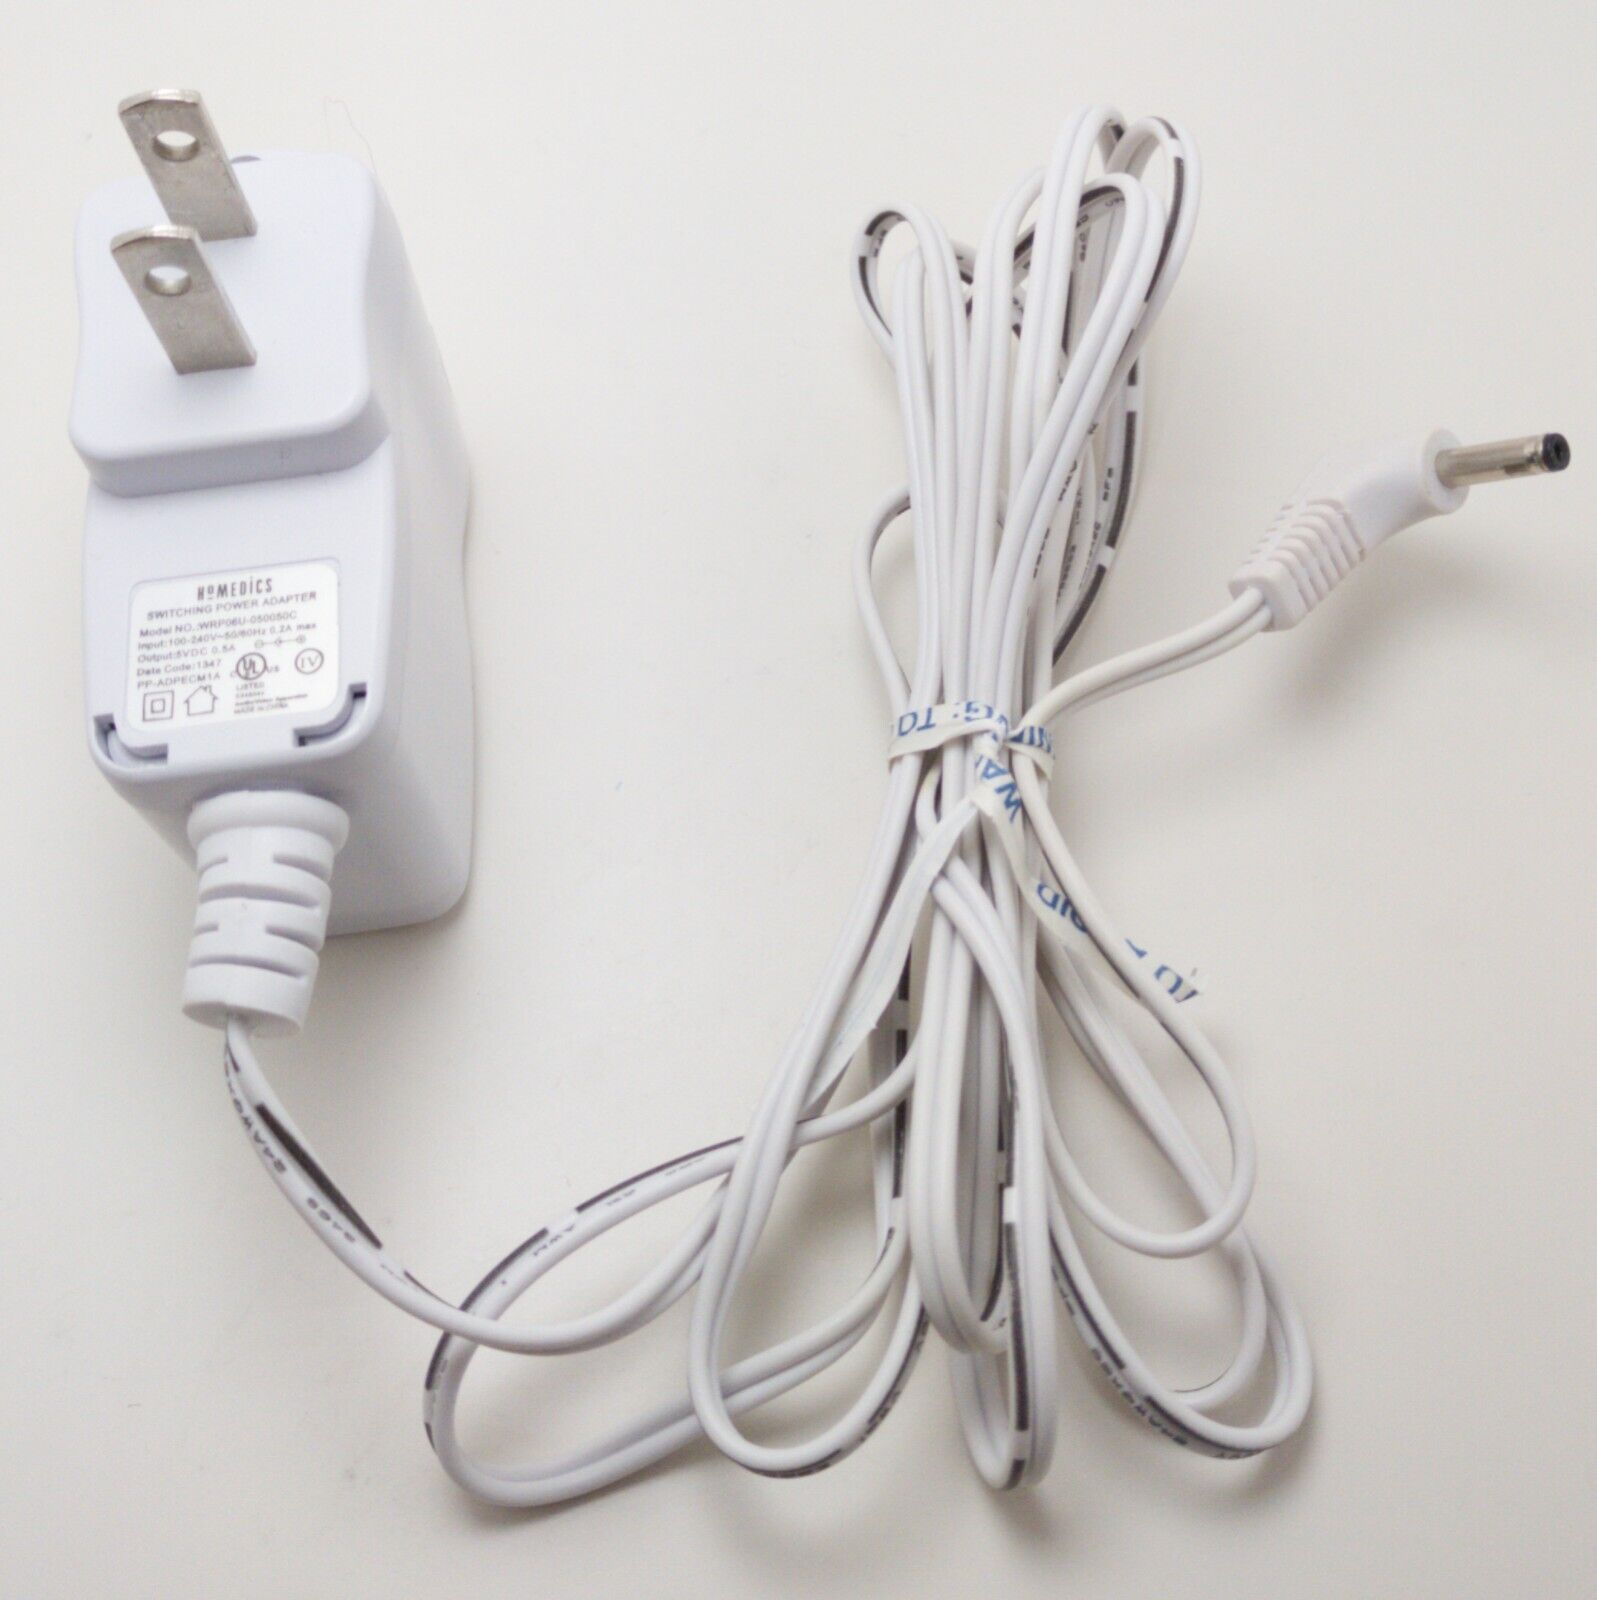 *Brand NEW*5V 0.5A AC ADAPTER Homedics SWITCHING WRP06U-050050C TESTED Working POWER ADAPTER